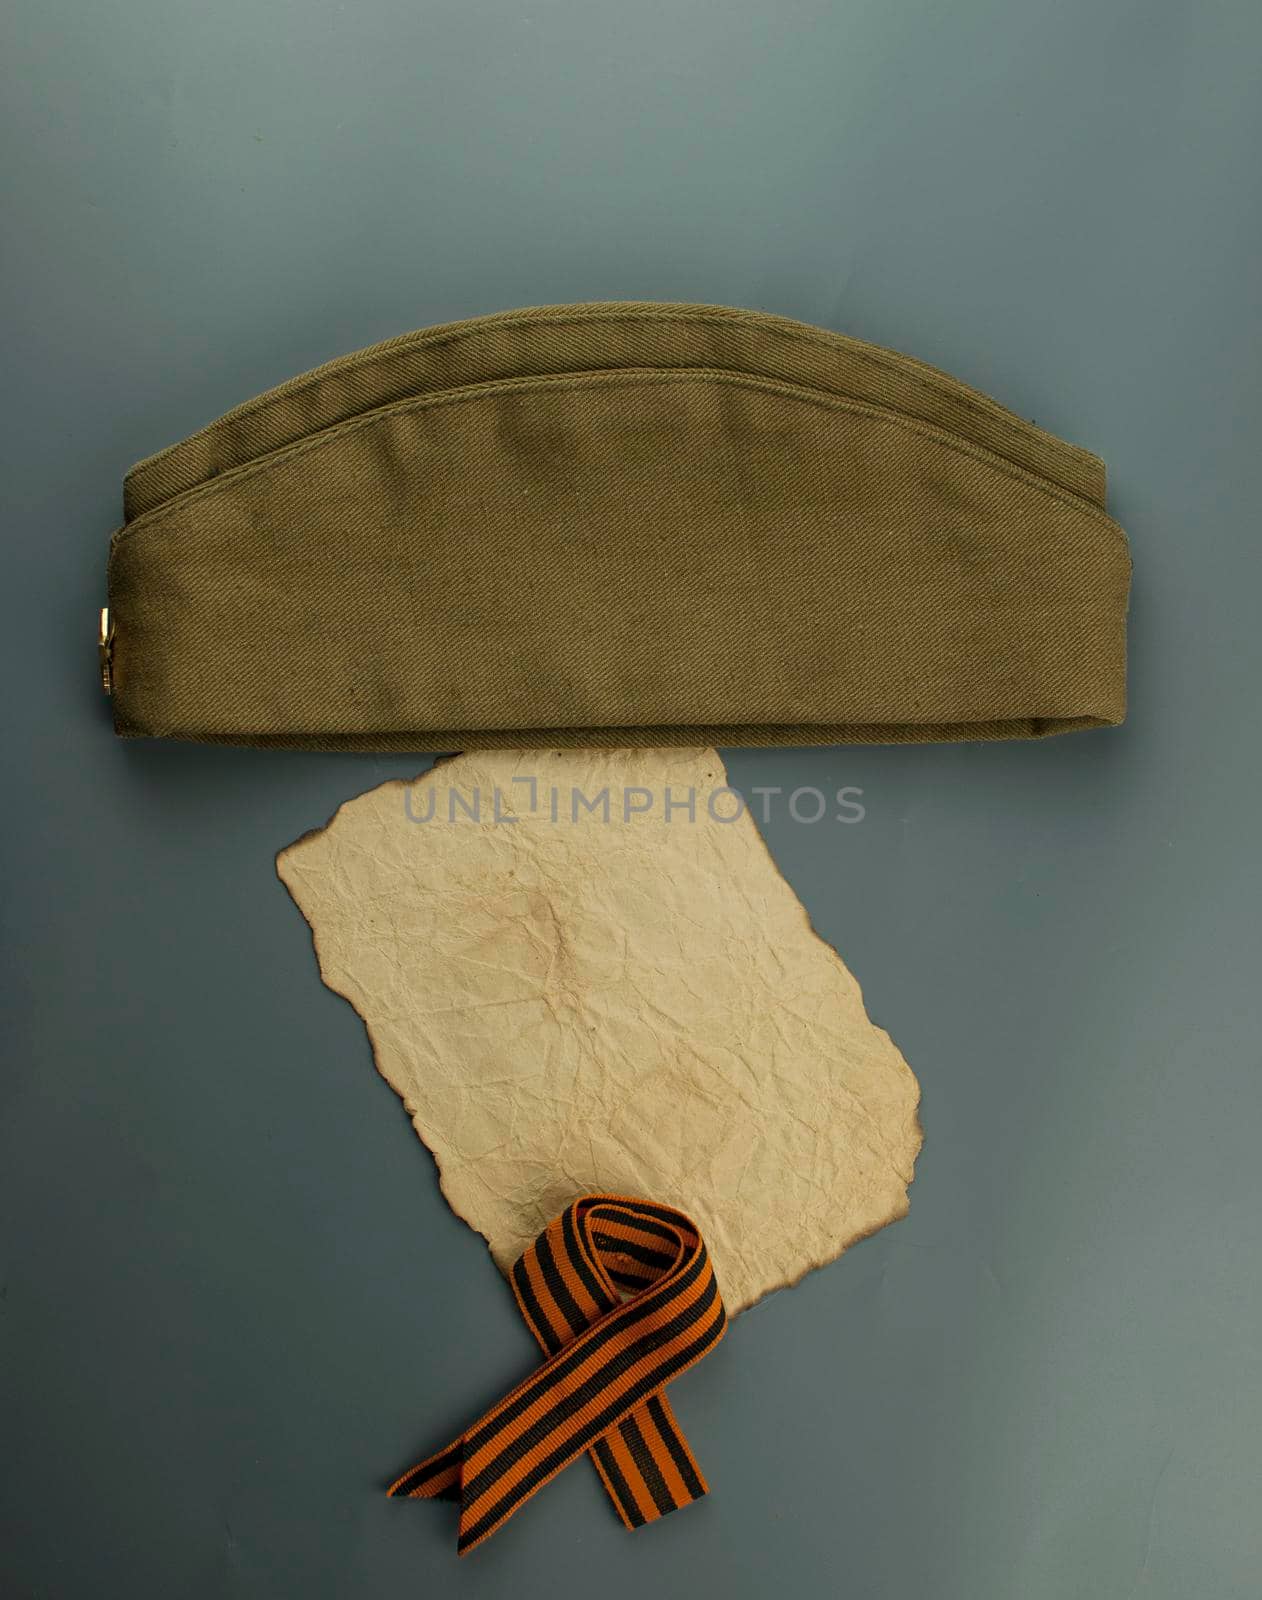 may 9 victory day holiday background. ribbon of St.George, burnt paper and military cap - traditional symbol of Victory Day 1945. greeting card design. copy space